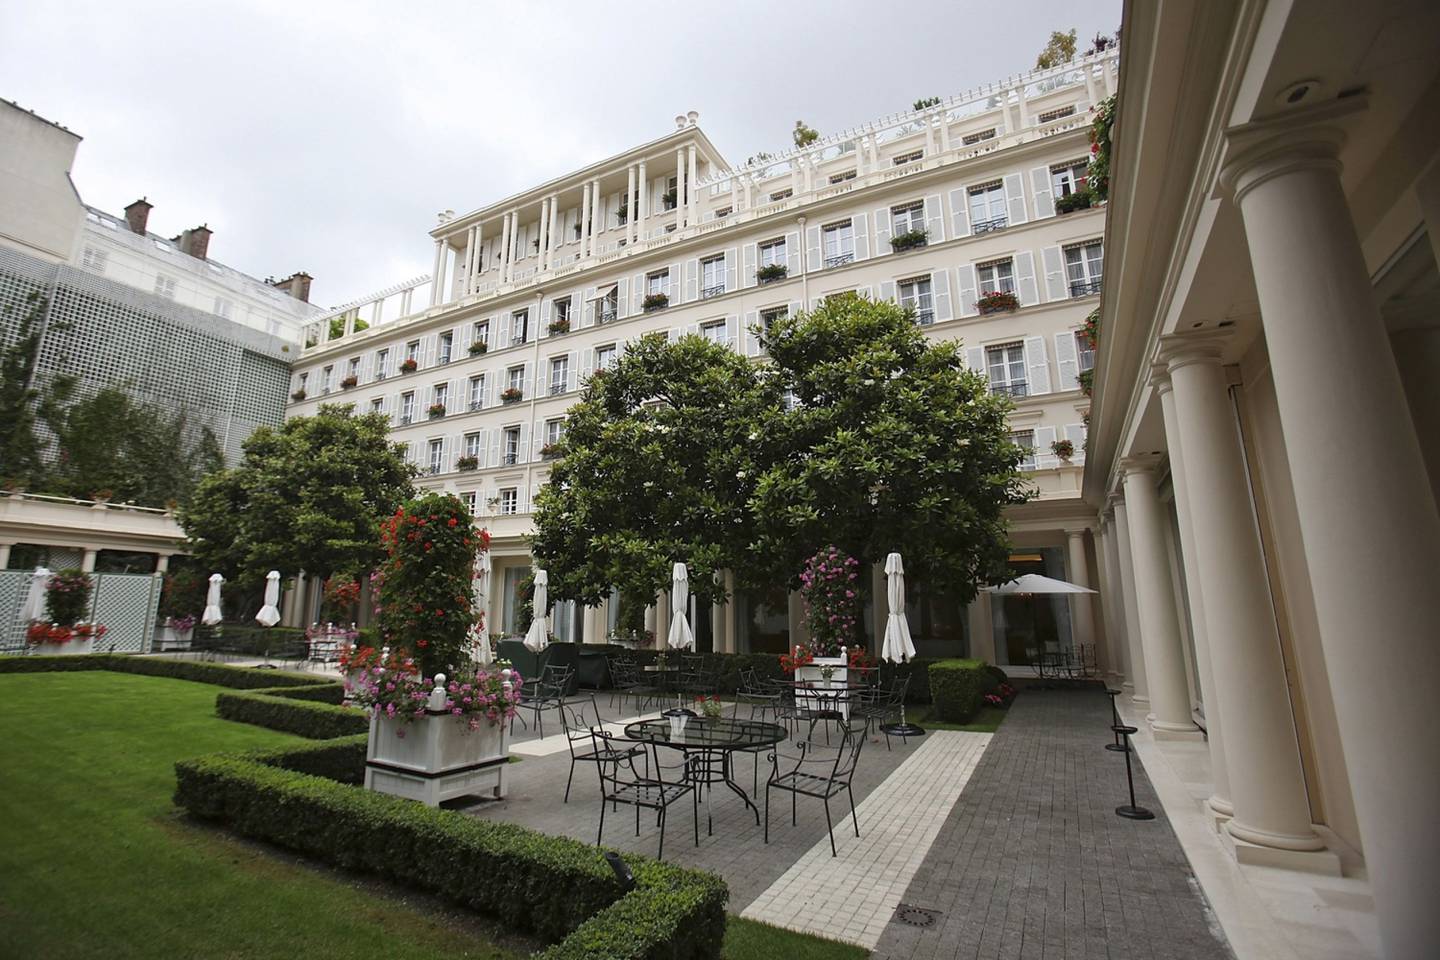 Trees line the garden at Le Bristol hotel in Paris, France, on Tuesday, June 14, 2011. Eight deluxe French hotels were crowned with the rare distinction of "palace" status in May, a new industry classification for luxury that goes beyond a mere five stars. Four Paris hotels, the Bristol, the Meurice, the Park Hyatt and the Plaza Athenee made the list. Photographer: Simon Dawson/Bloombergdfd